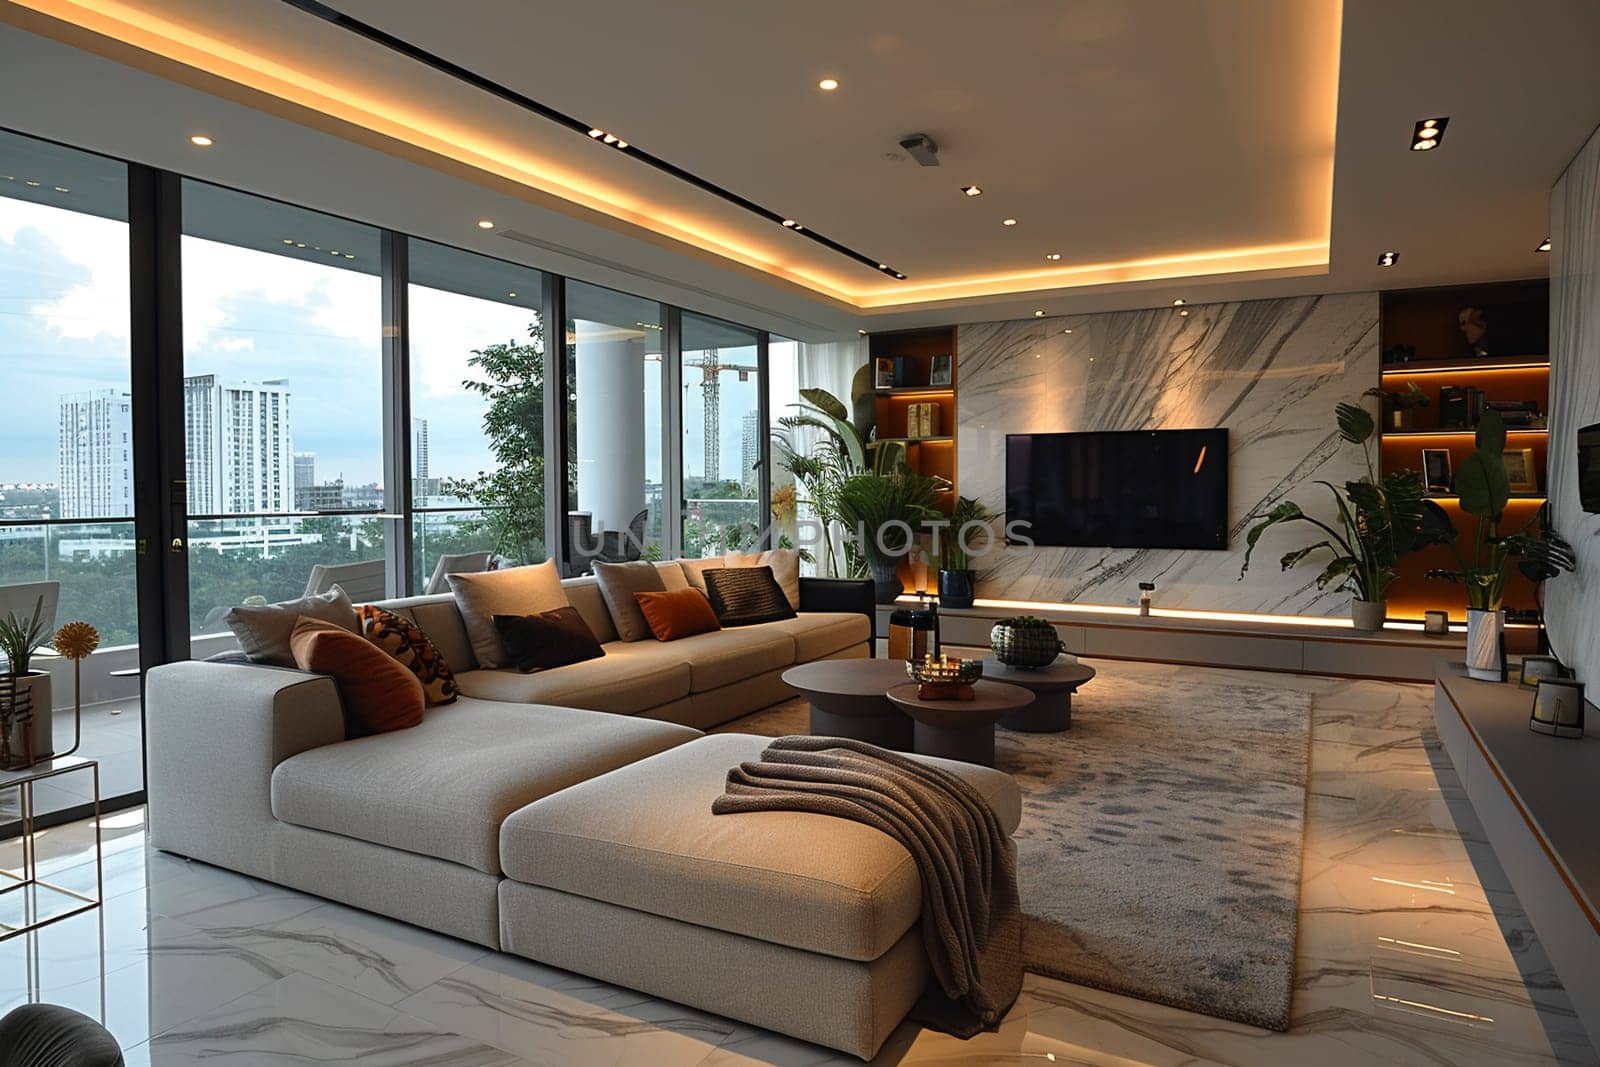 High-tech smart home living room with integrated technology and sleek furniture